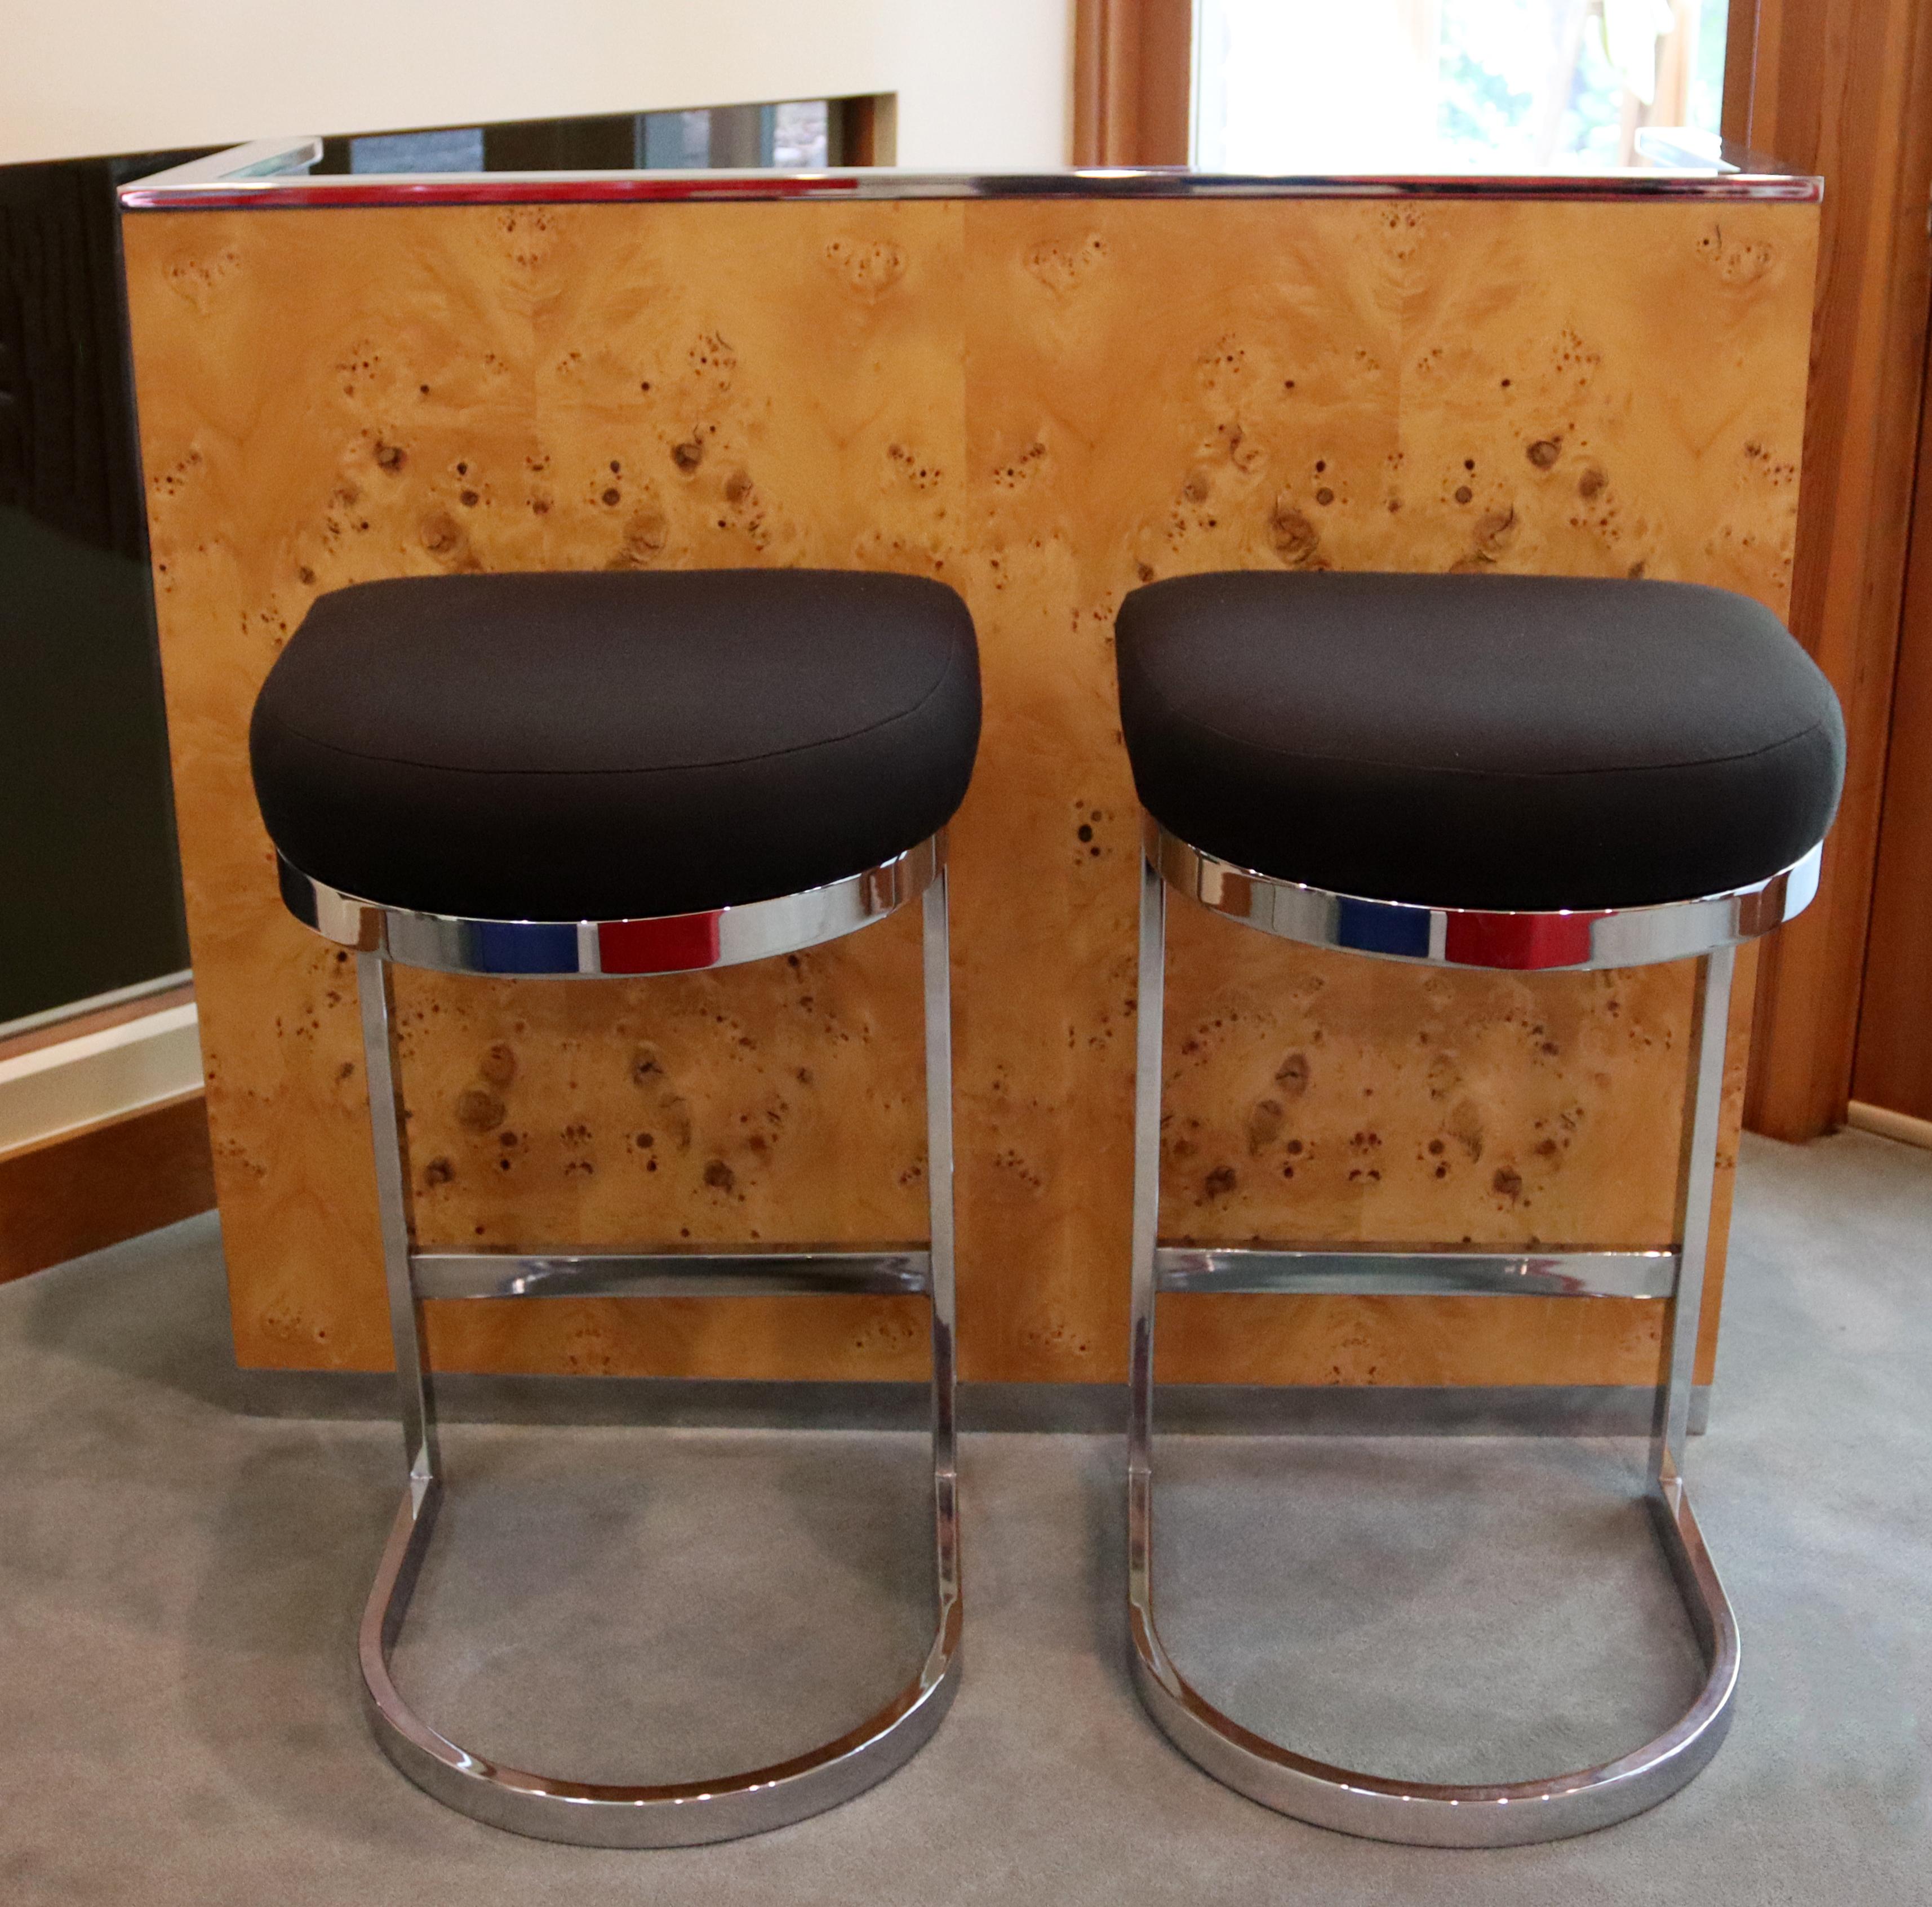 For your consideration is a spectacular, burlwood standing bar, with chrome accents and a pair of cantilever chrome barstools, by Milo Baughman, circa the 1970s. In excellent vintage condition. The dimensions of the bar are 48